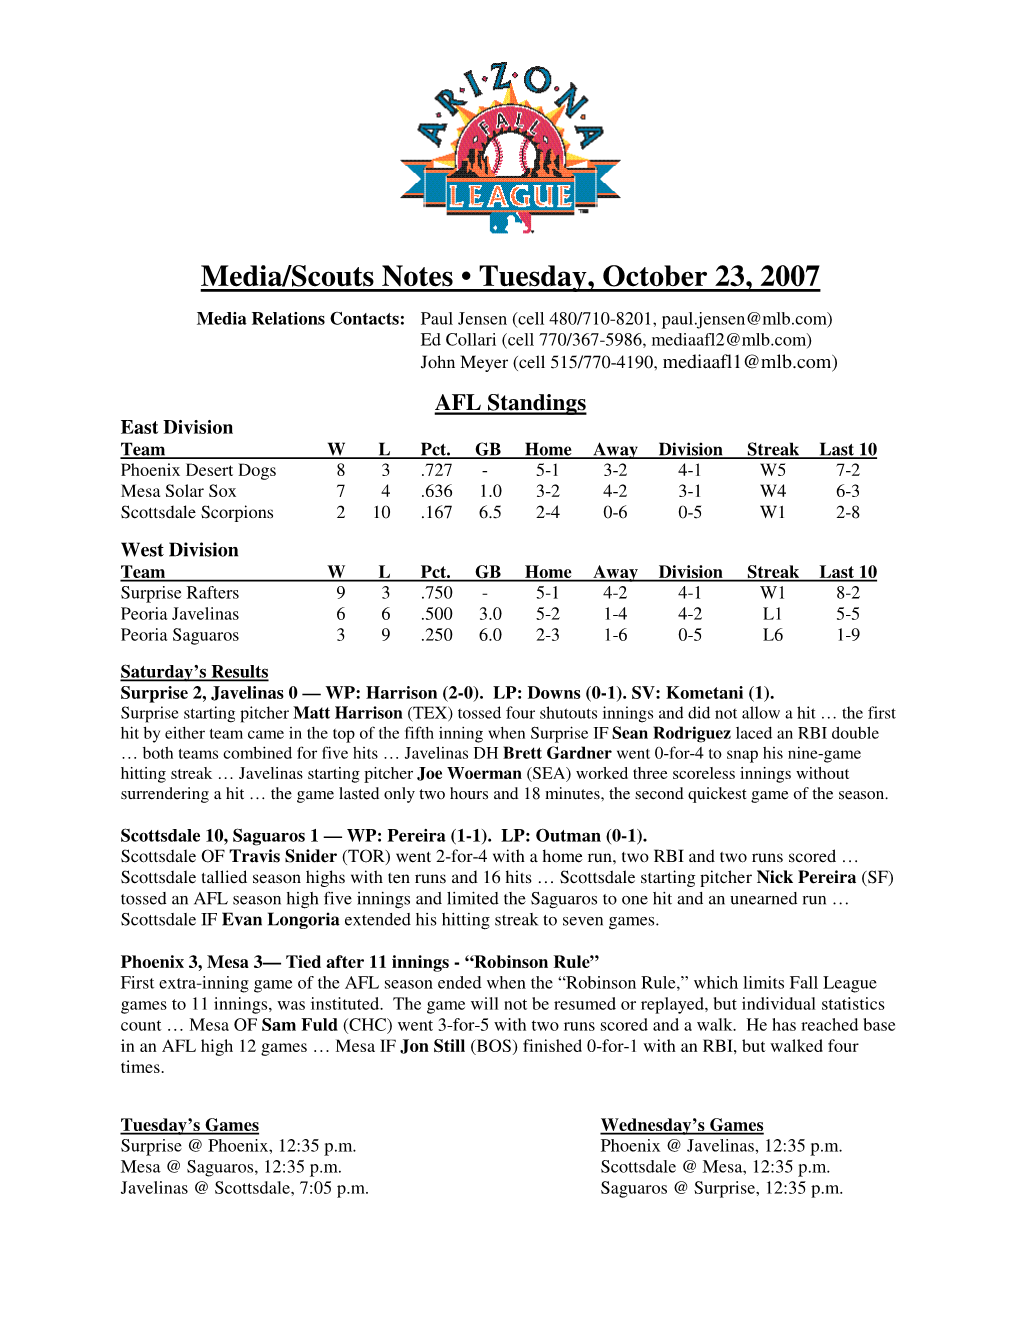 Media/Scouts Notes • Tuesday, October 23, 2007